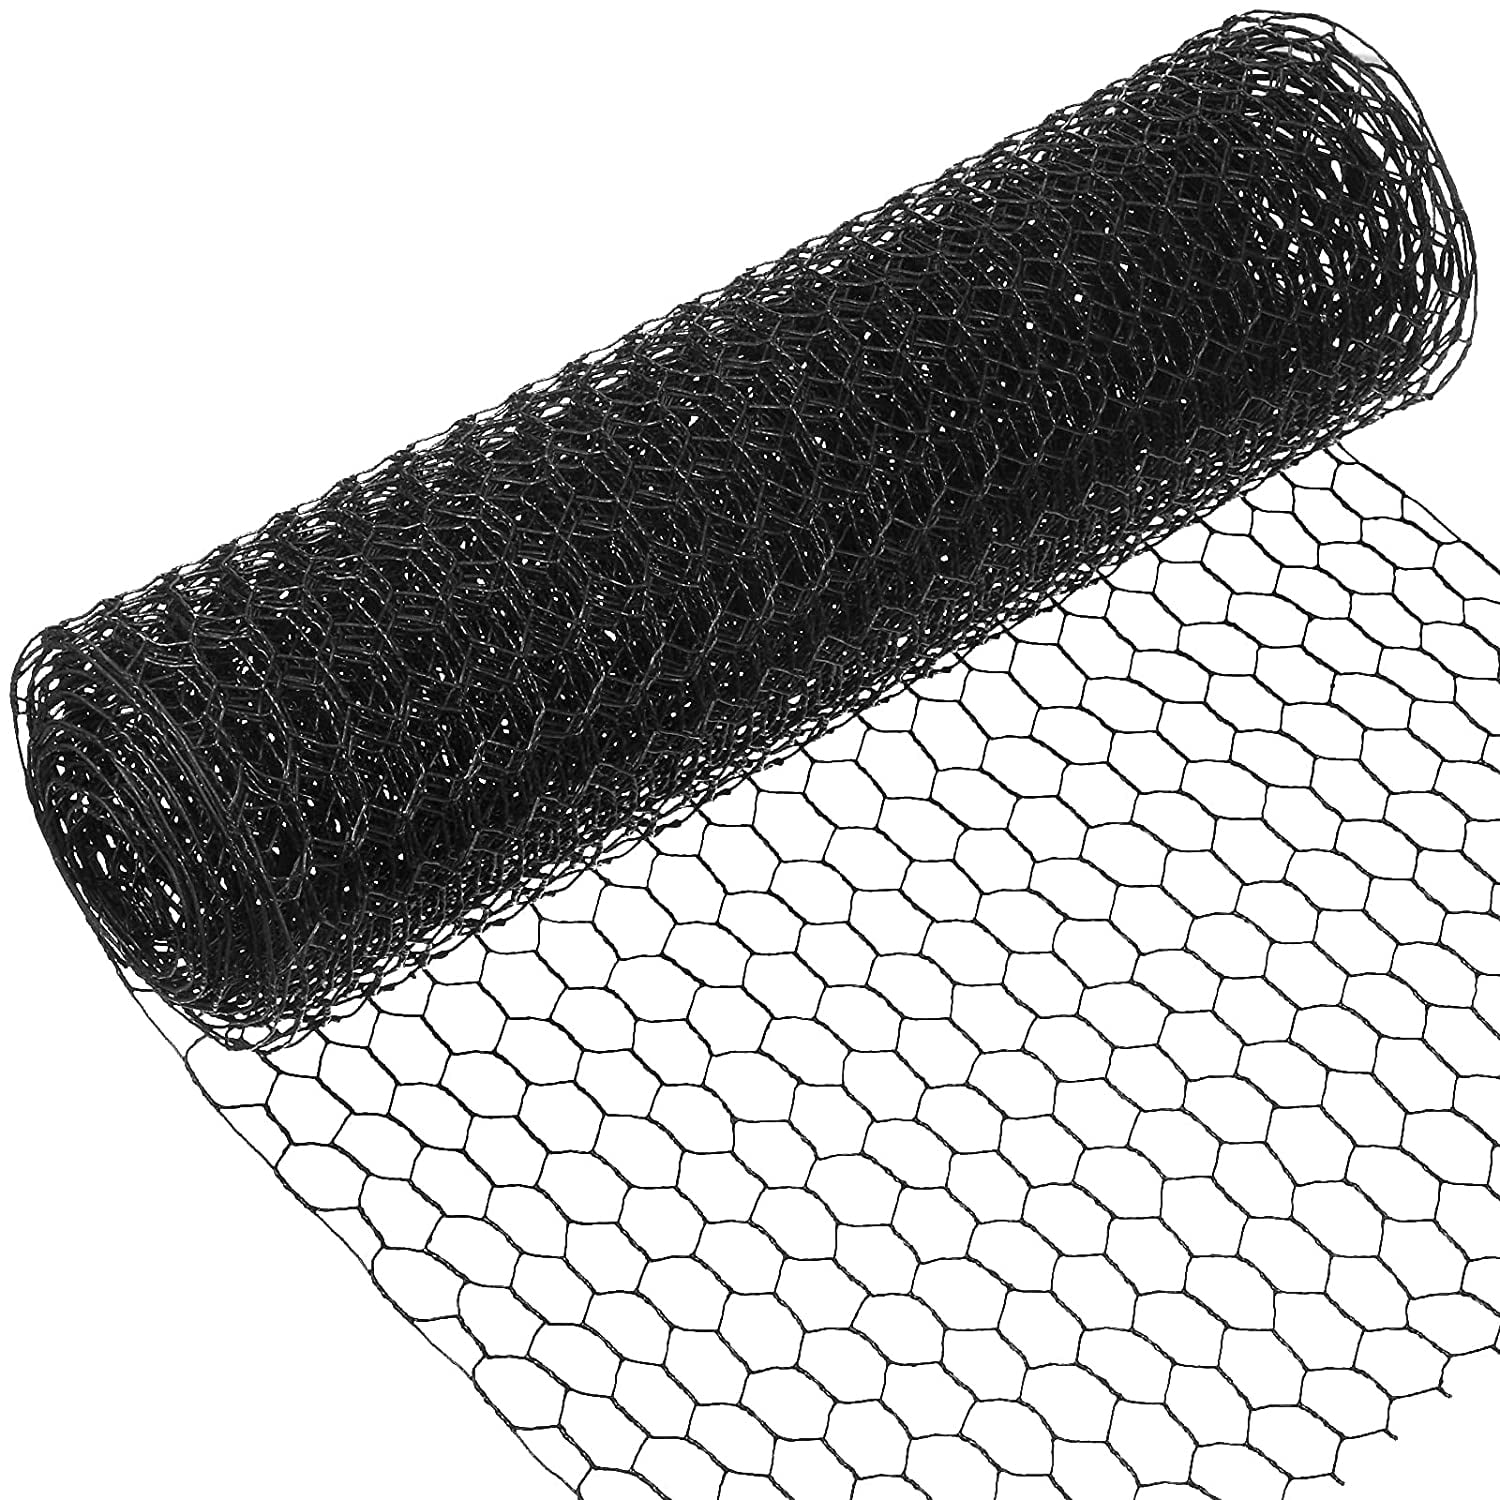 BSTWM Chicken Wire Net for Craft Projects,3 Sheets Lightweight Galvanized  Hexagonal Wire 13.7 Inches x 40 Inches x 0.63 Inch Mesh,with 1 Mini Wire